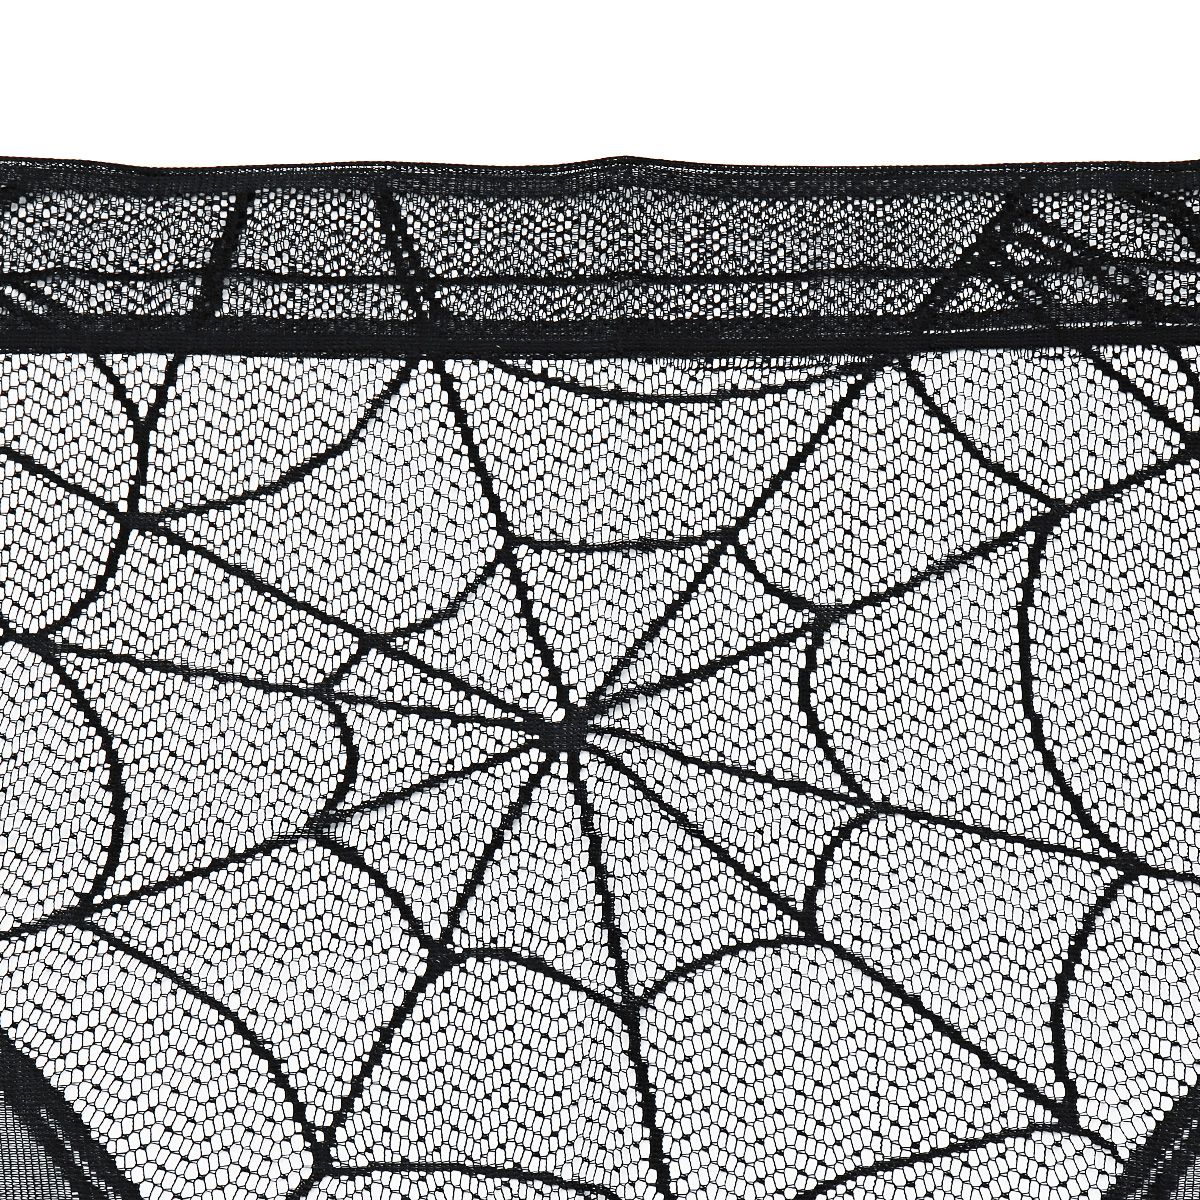 Halloween-Bat-Lace-Props-Table-Lamp-Window-Curtain-Fireplace-Cloth-Home-Decorations-1582917